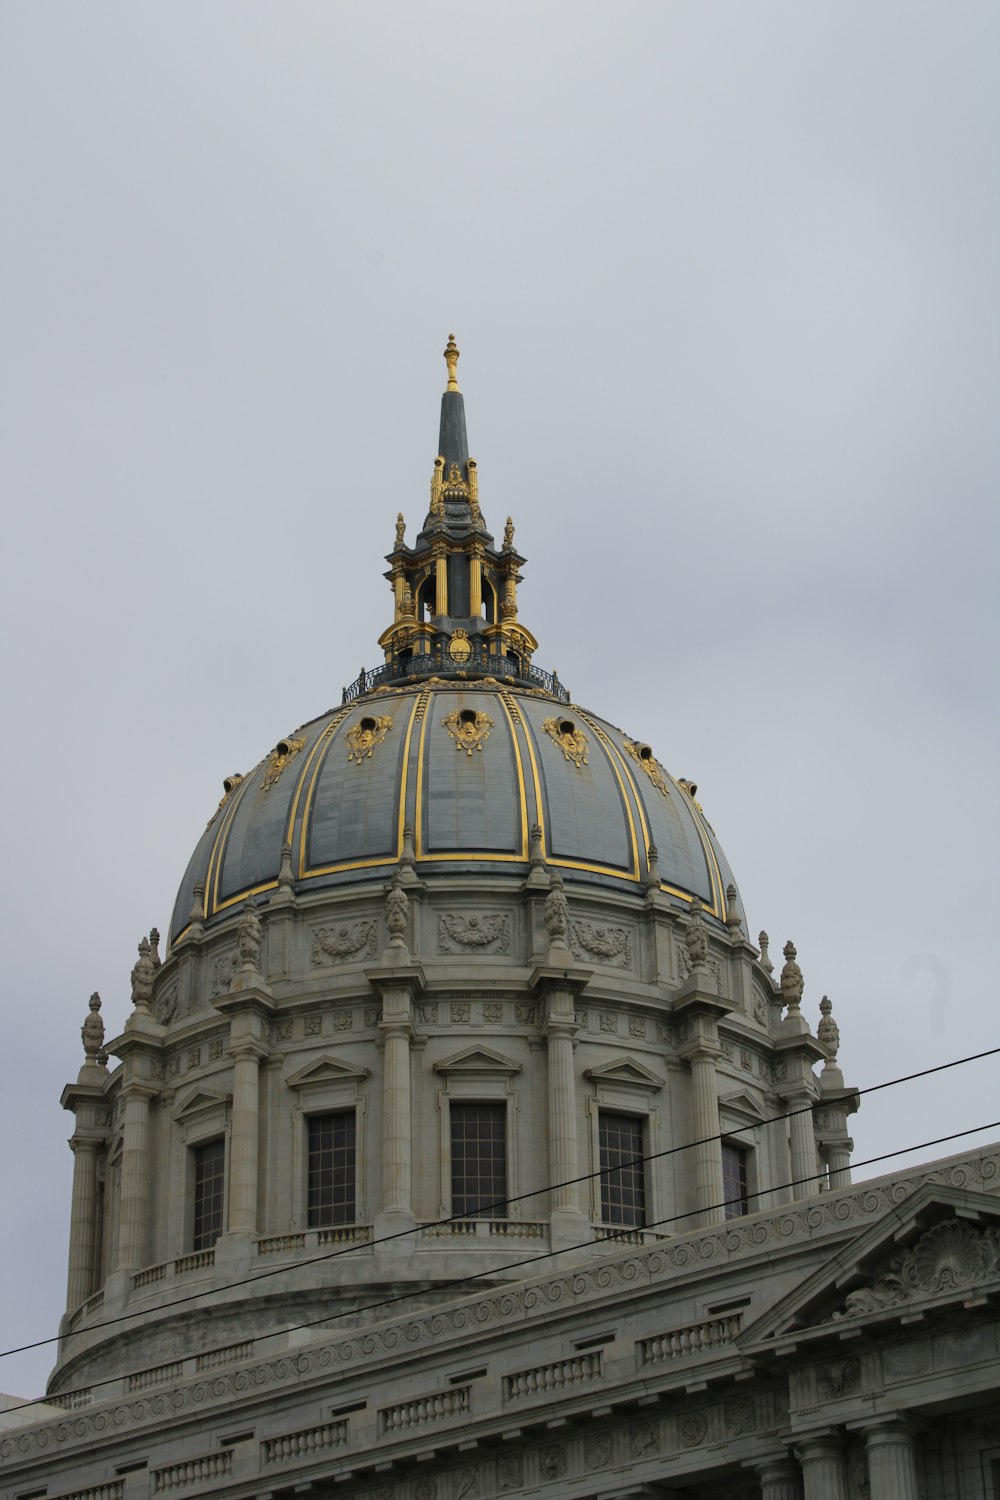 a domed building with a gold roof